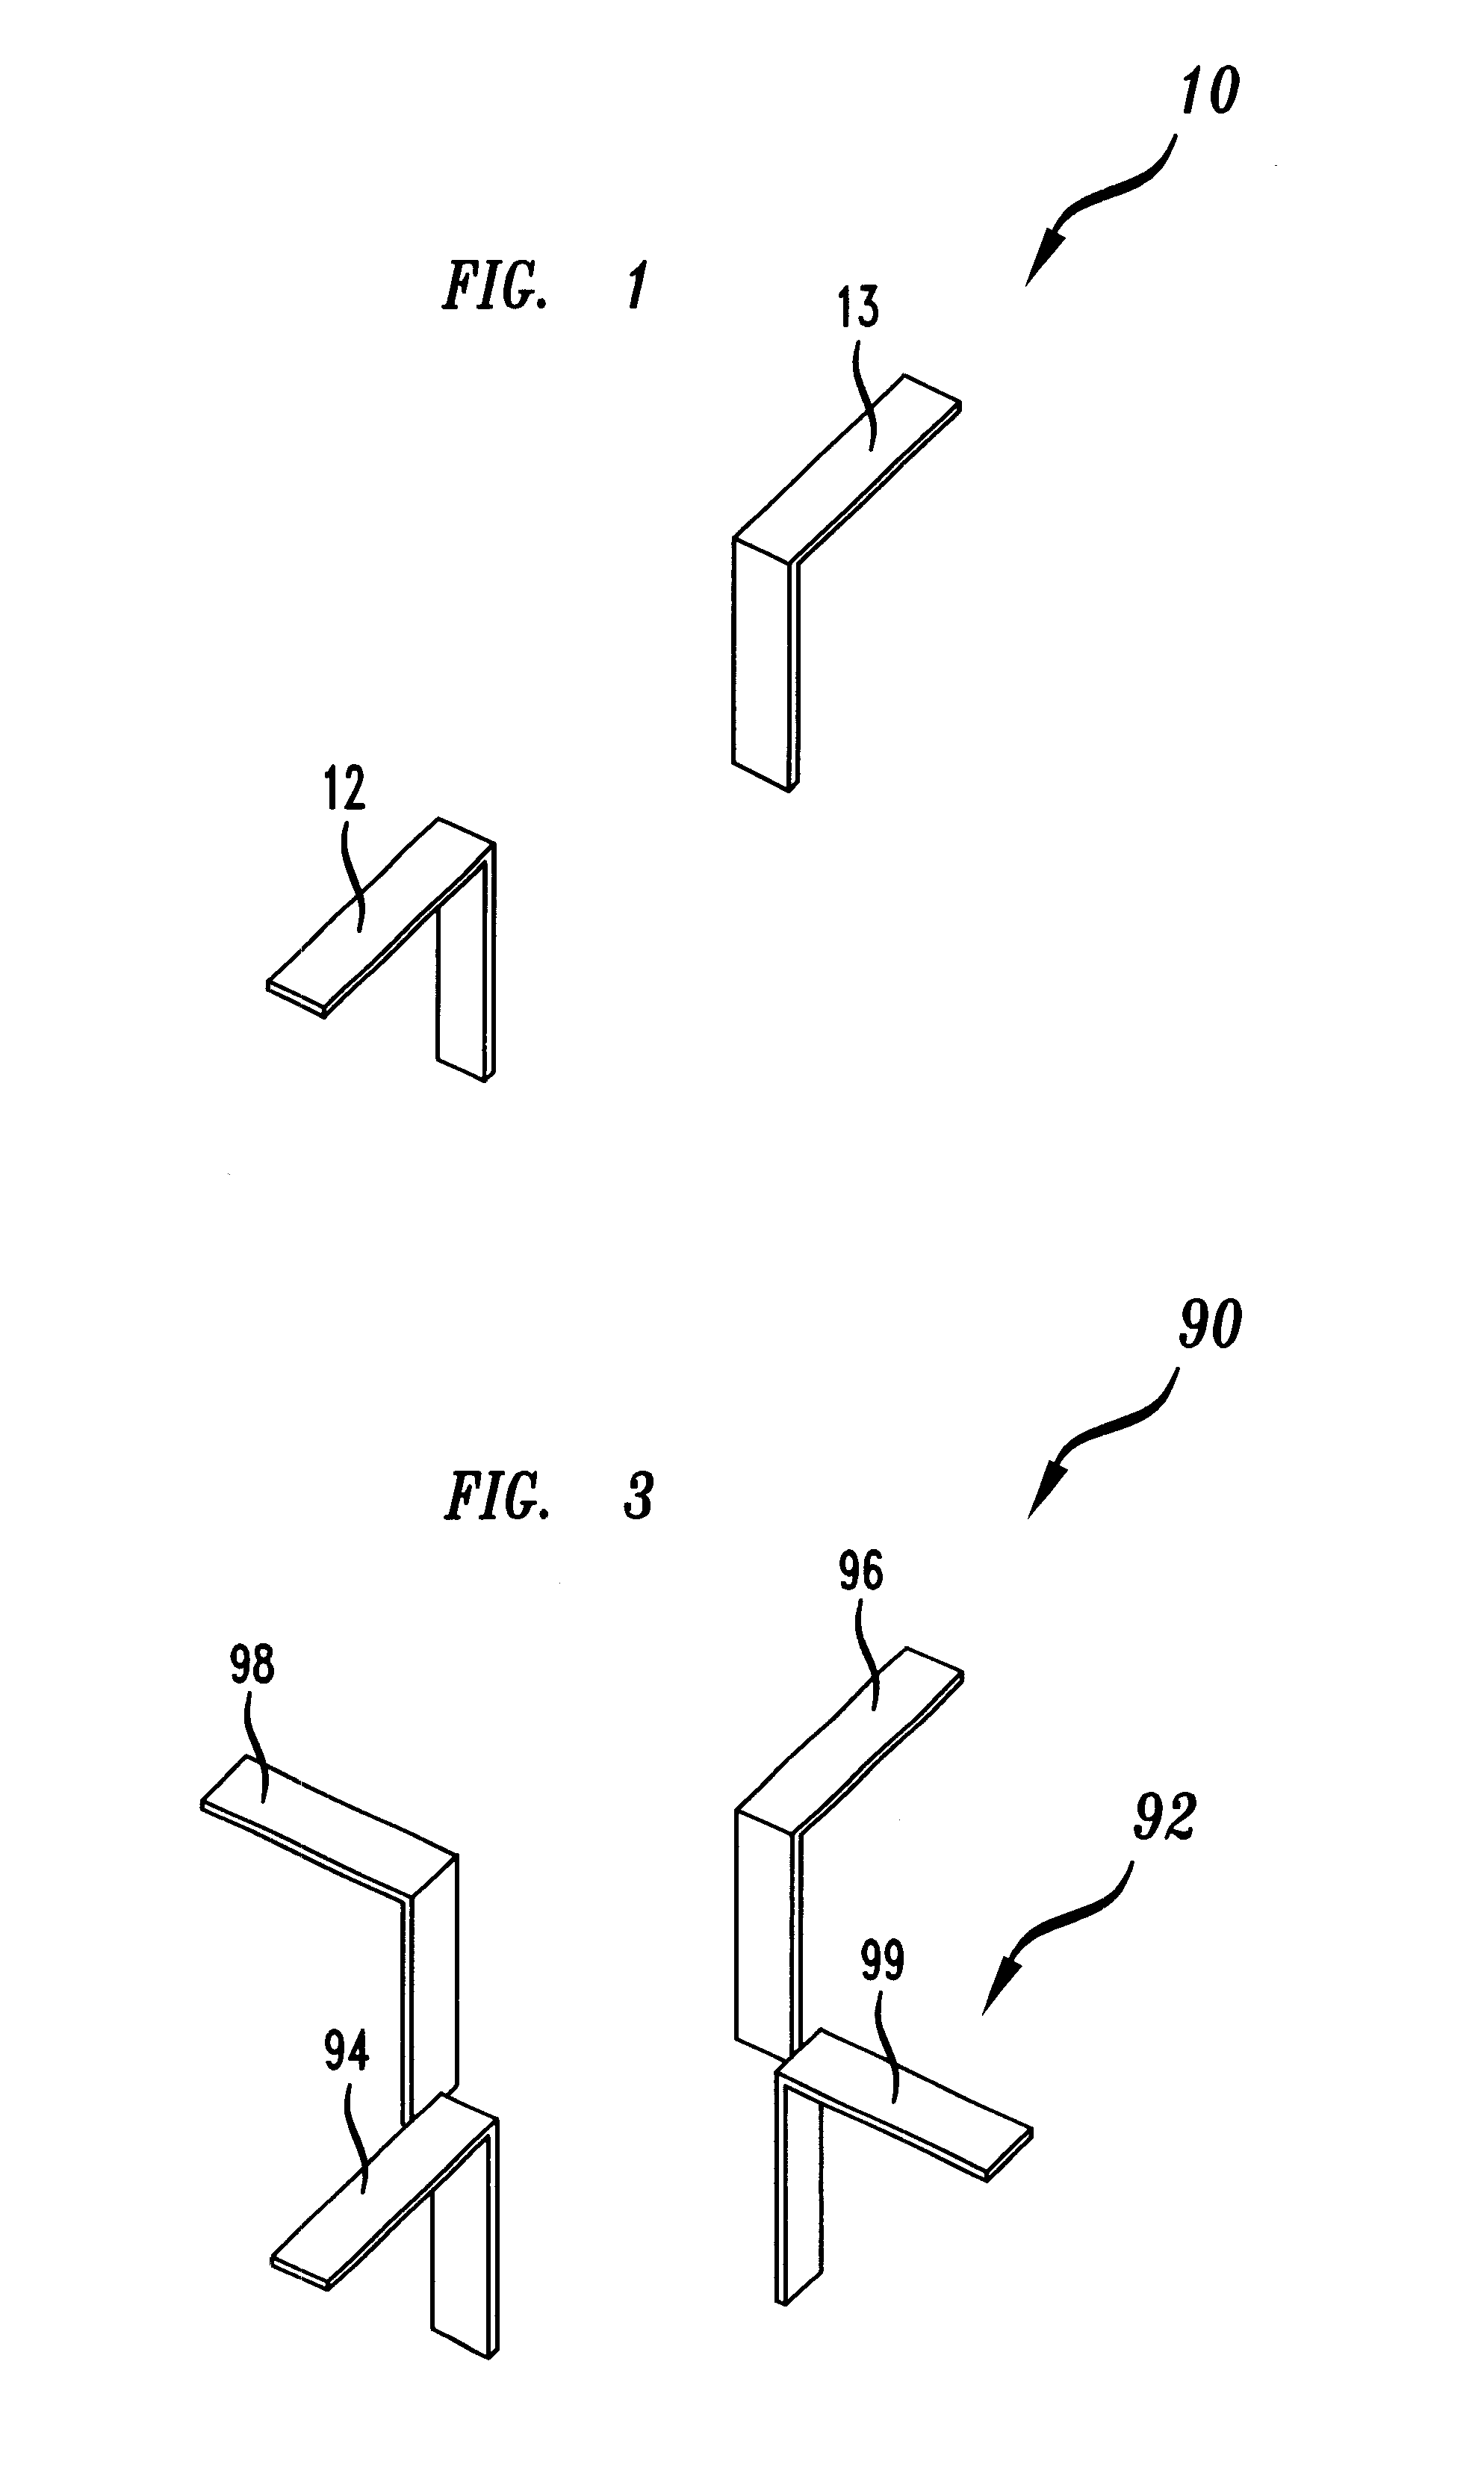 Phased array antenna with active parasitic elements